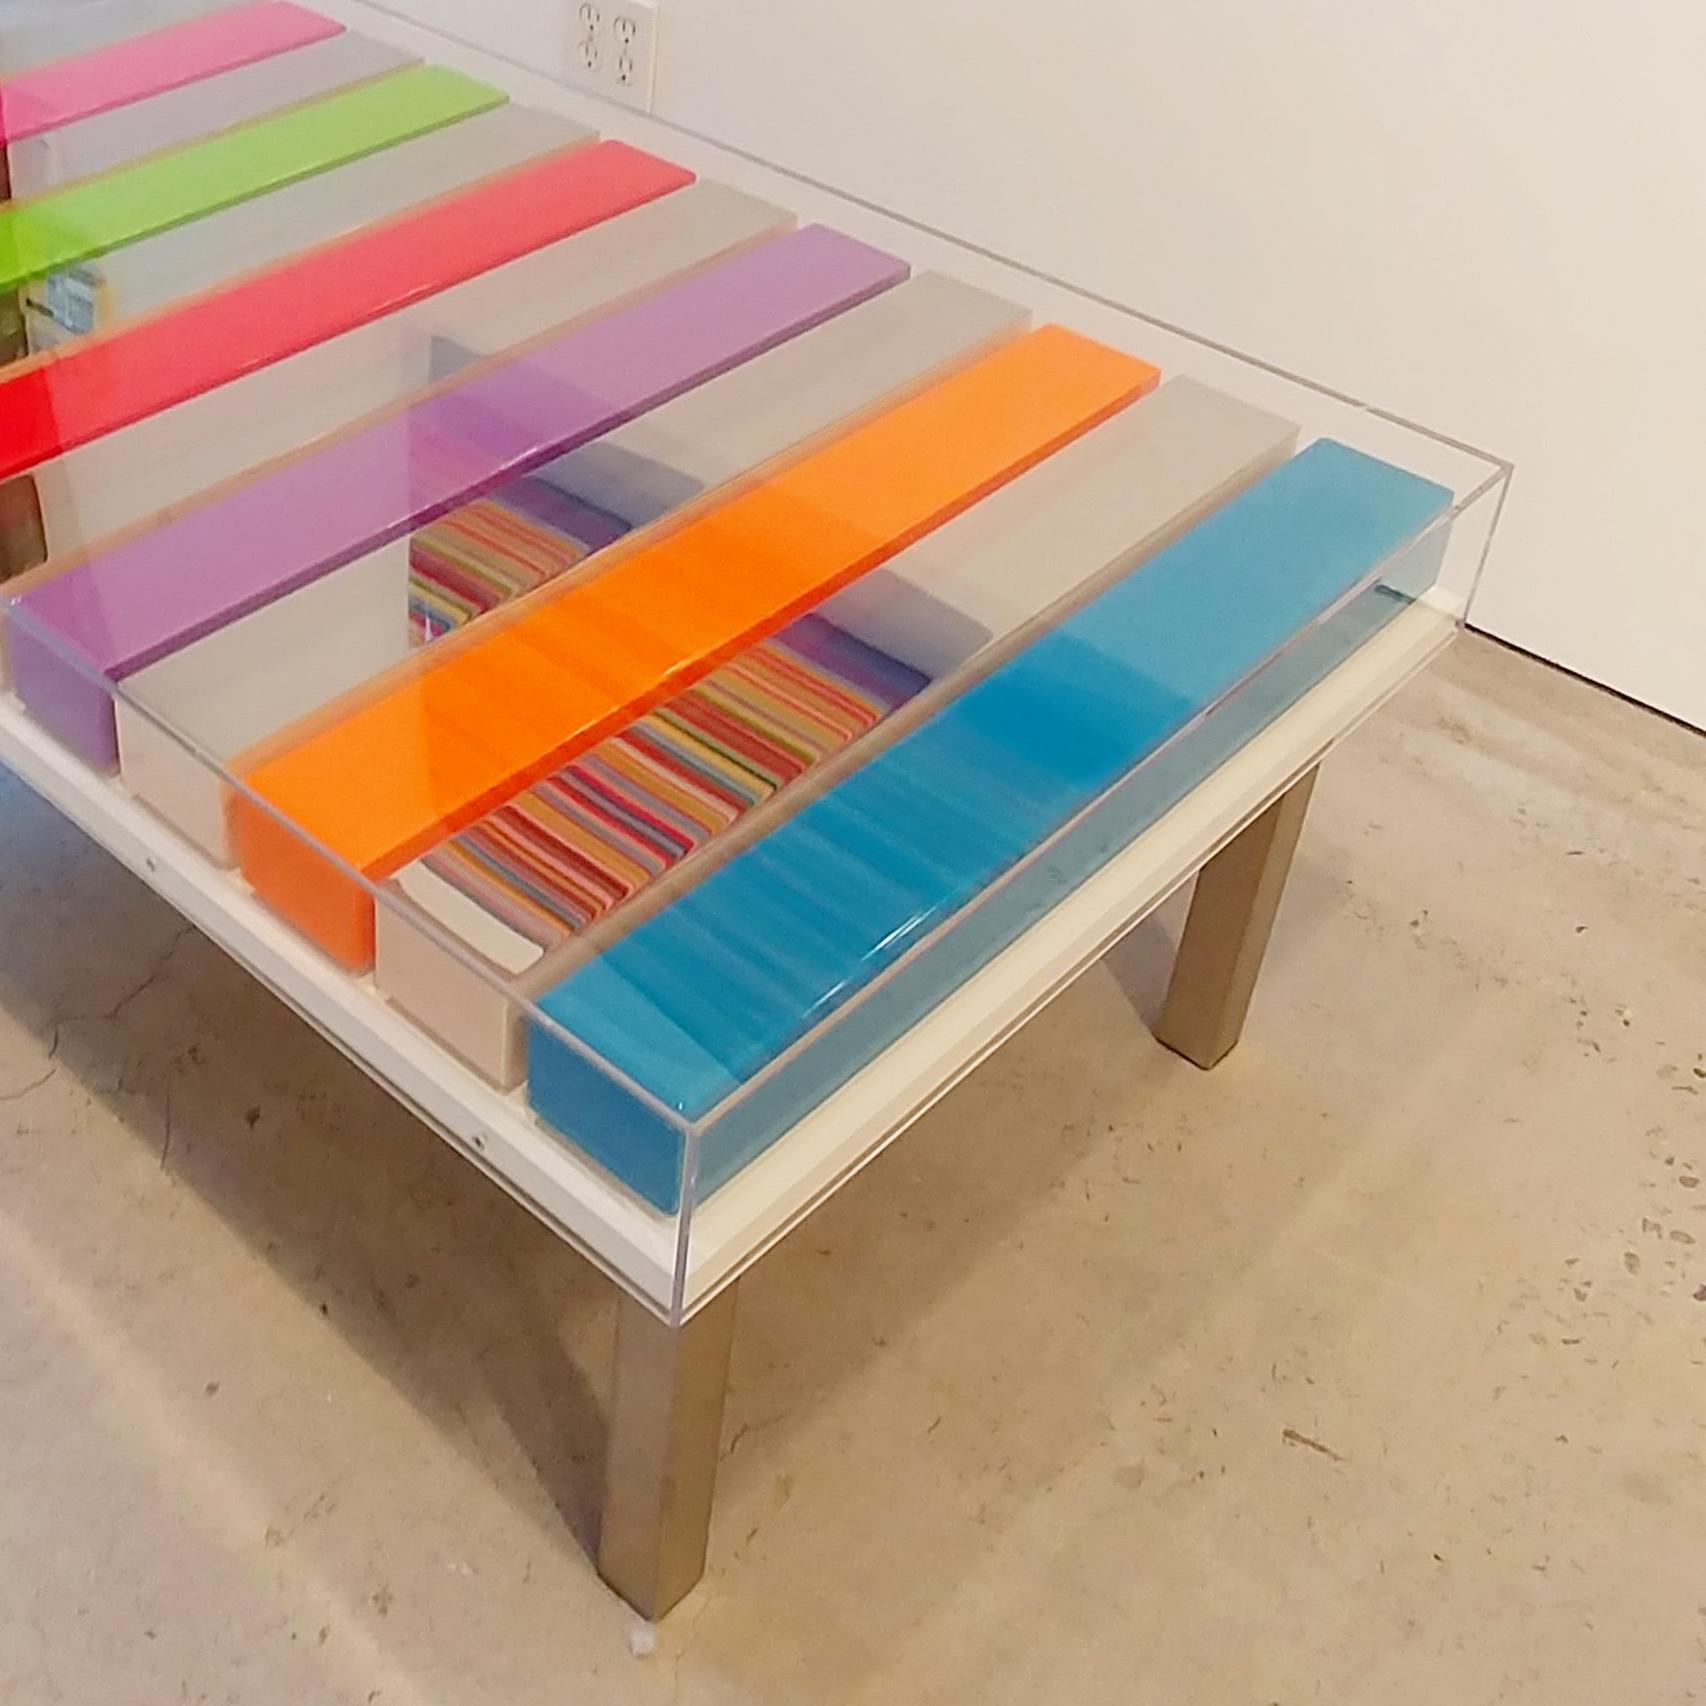 Heidi Spector's It’s Not You, It’s Me is the artist's first sculptural object which can be used as a functional coffee table. 

Referred to by the artist as “geometric minimalism,” Spector purposefully avoids injecting specific emotional content to